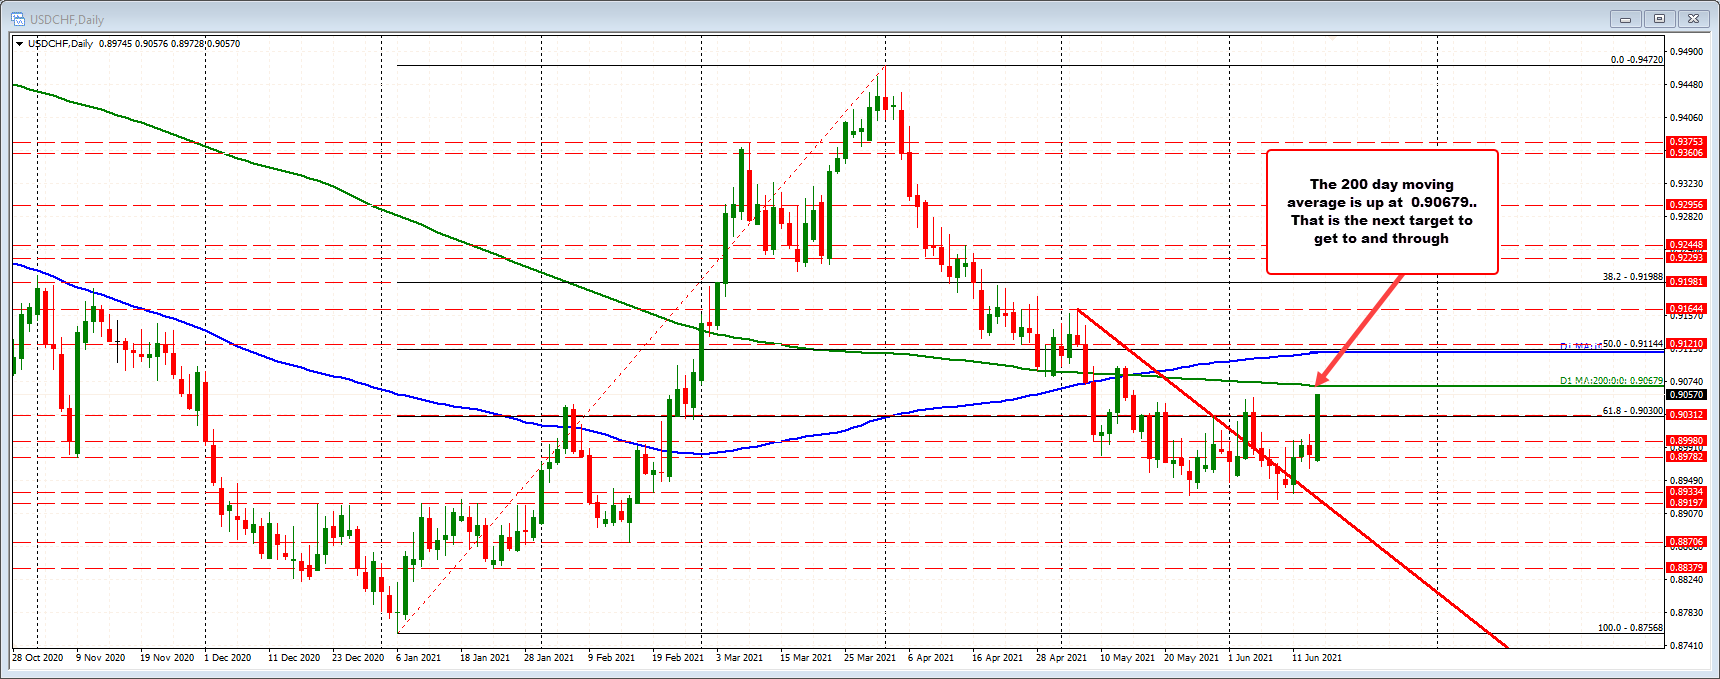 USDCHF on the daily chart